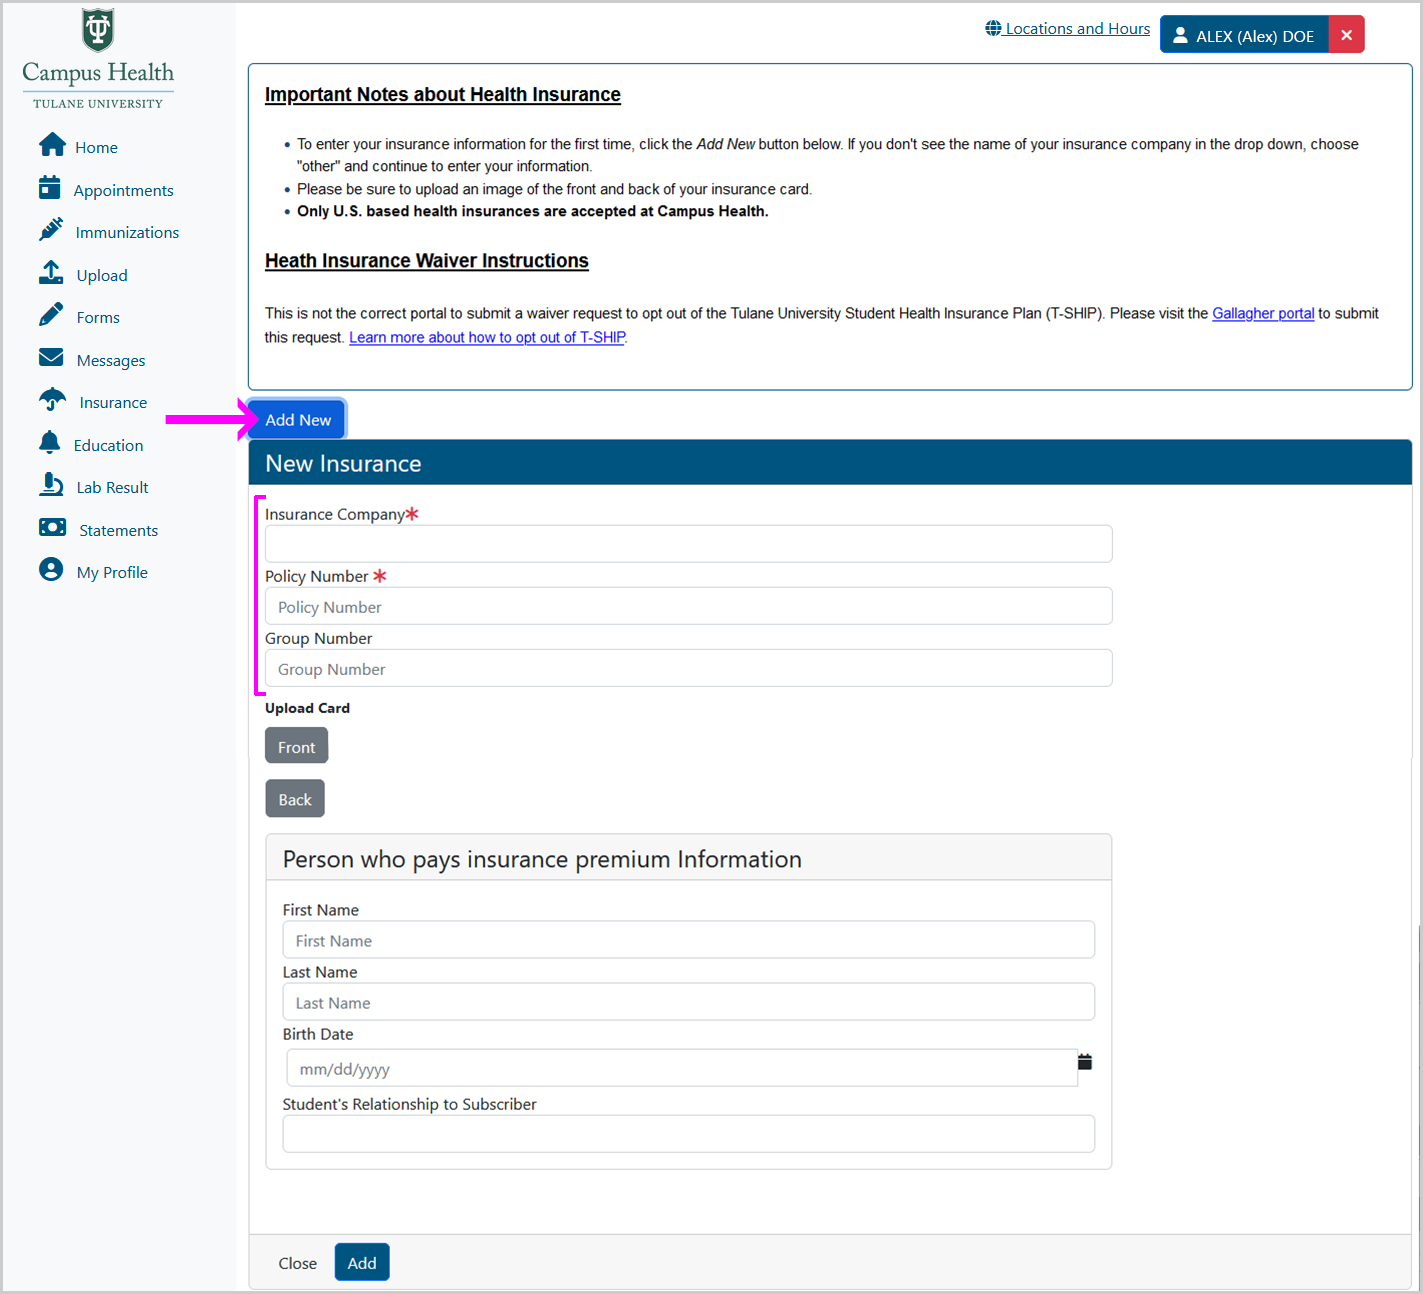 Screenshot of Insurance Page that shows the New Insurance menu, with a pink arrow pointing at the "Add New" button and the "Insurance Company", "Policy Number" and "Group Number" text fields highlighted